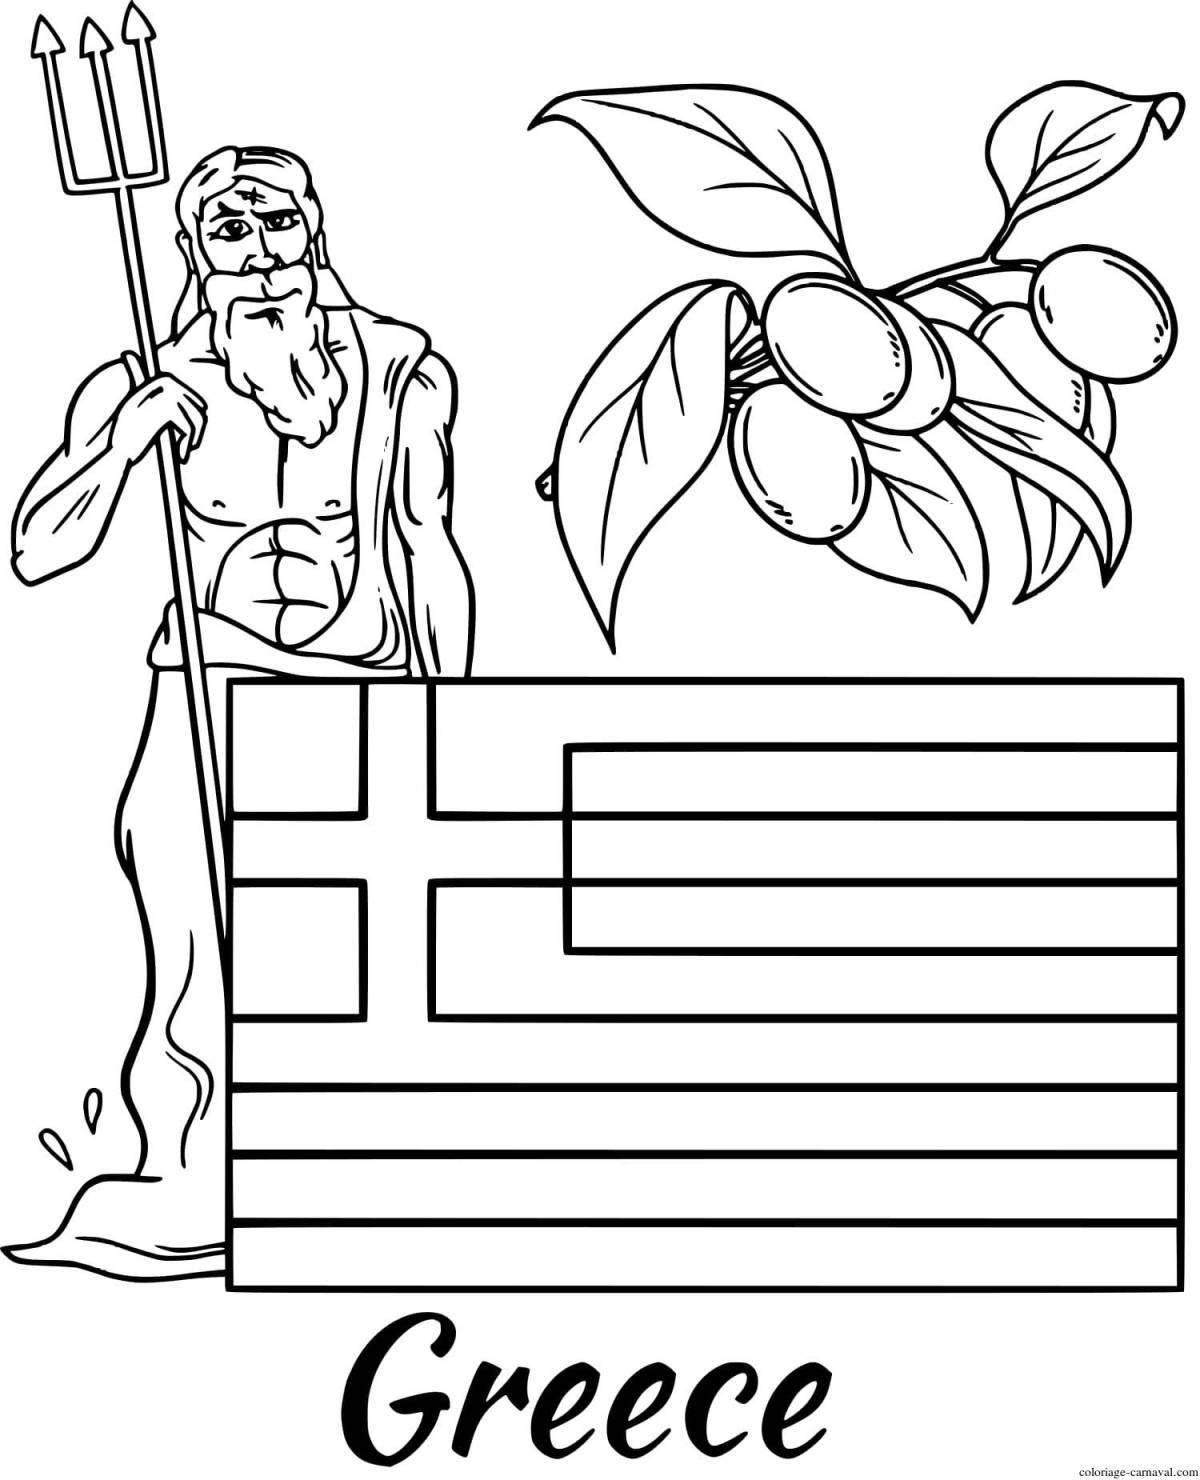 Coloring page vibrant greece flag